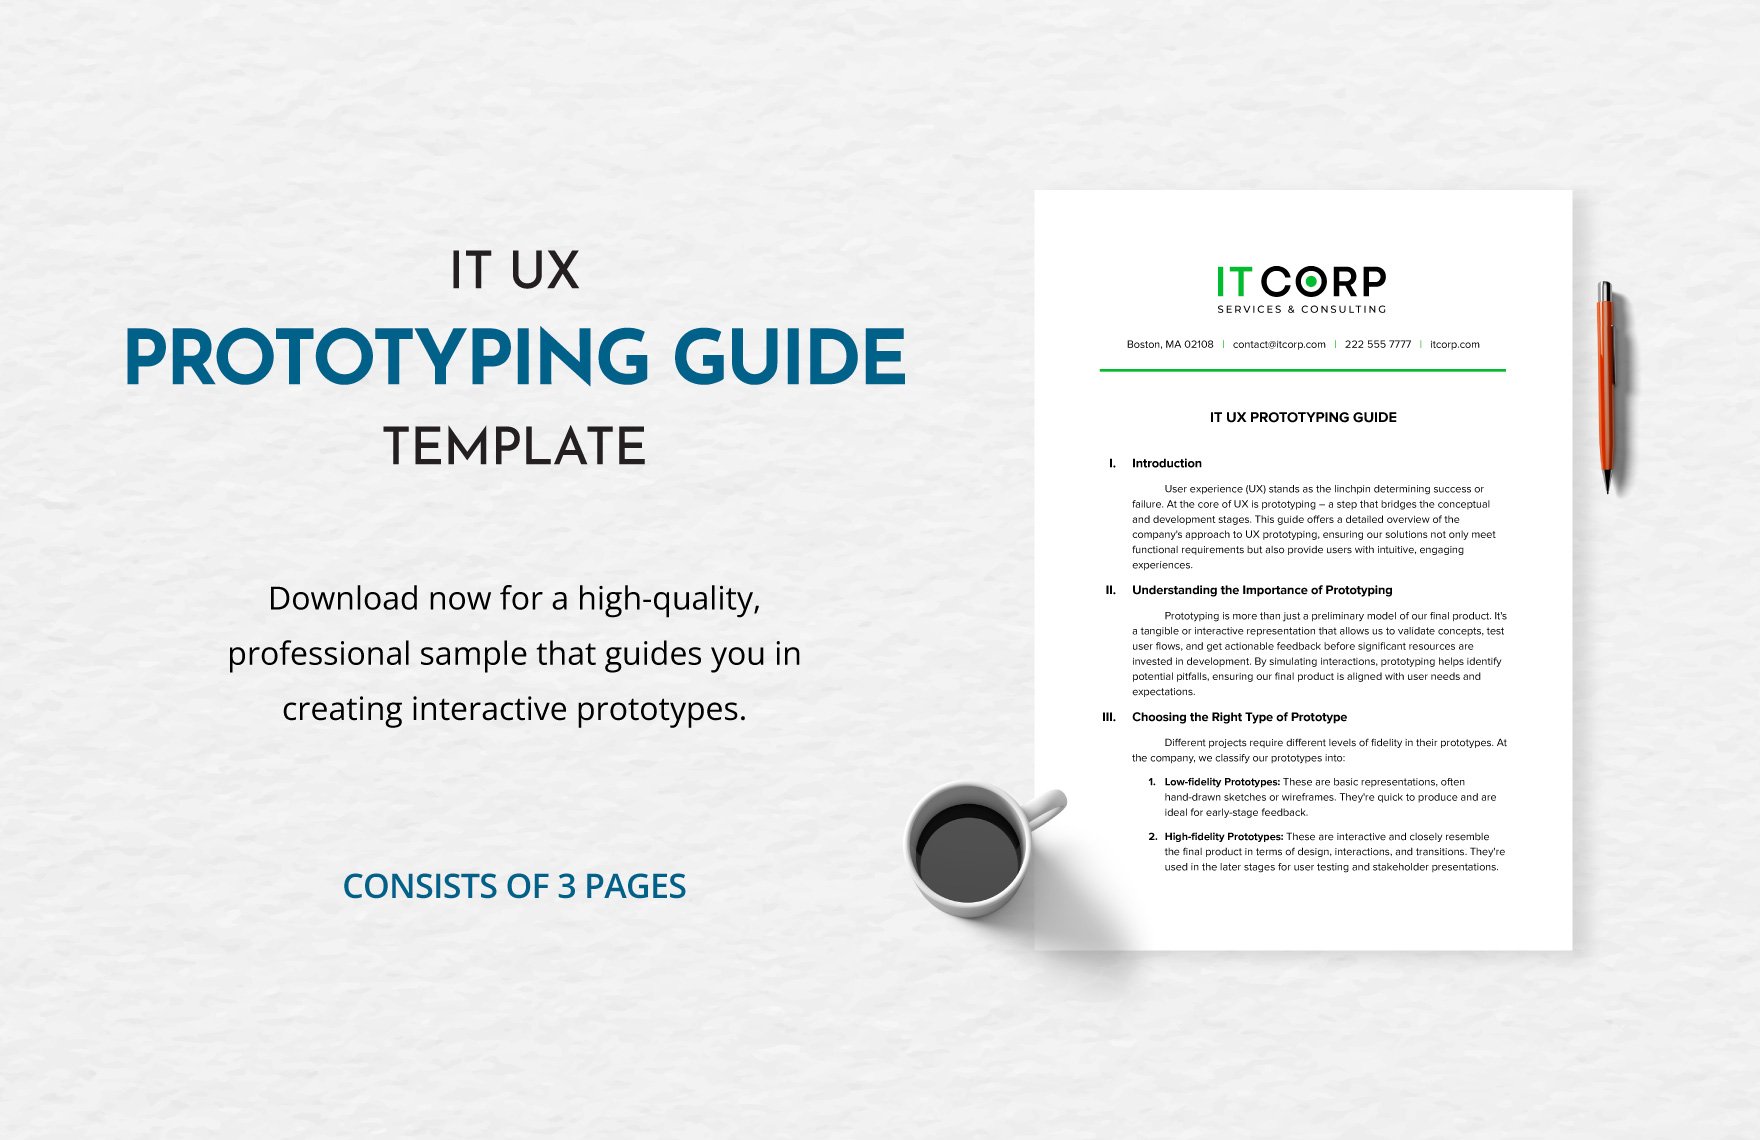 IT UX Prototyping Guide Template